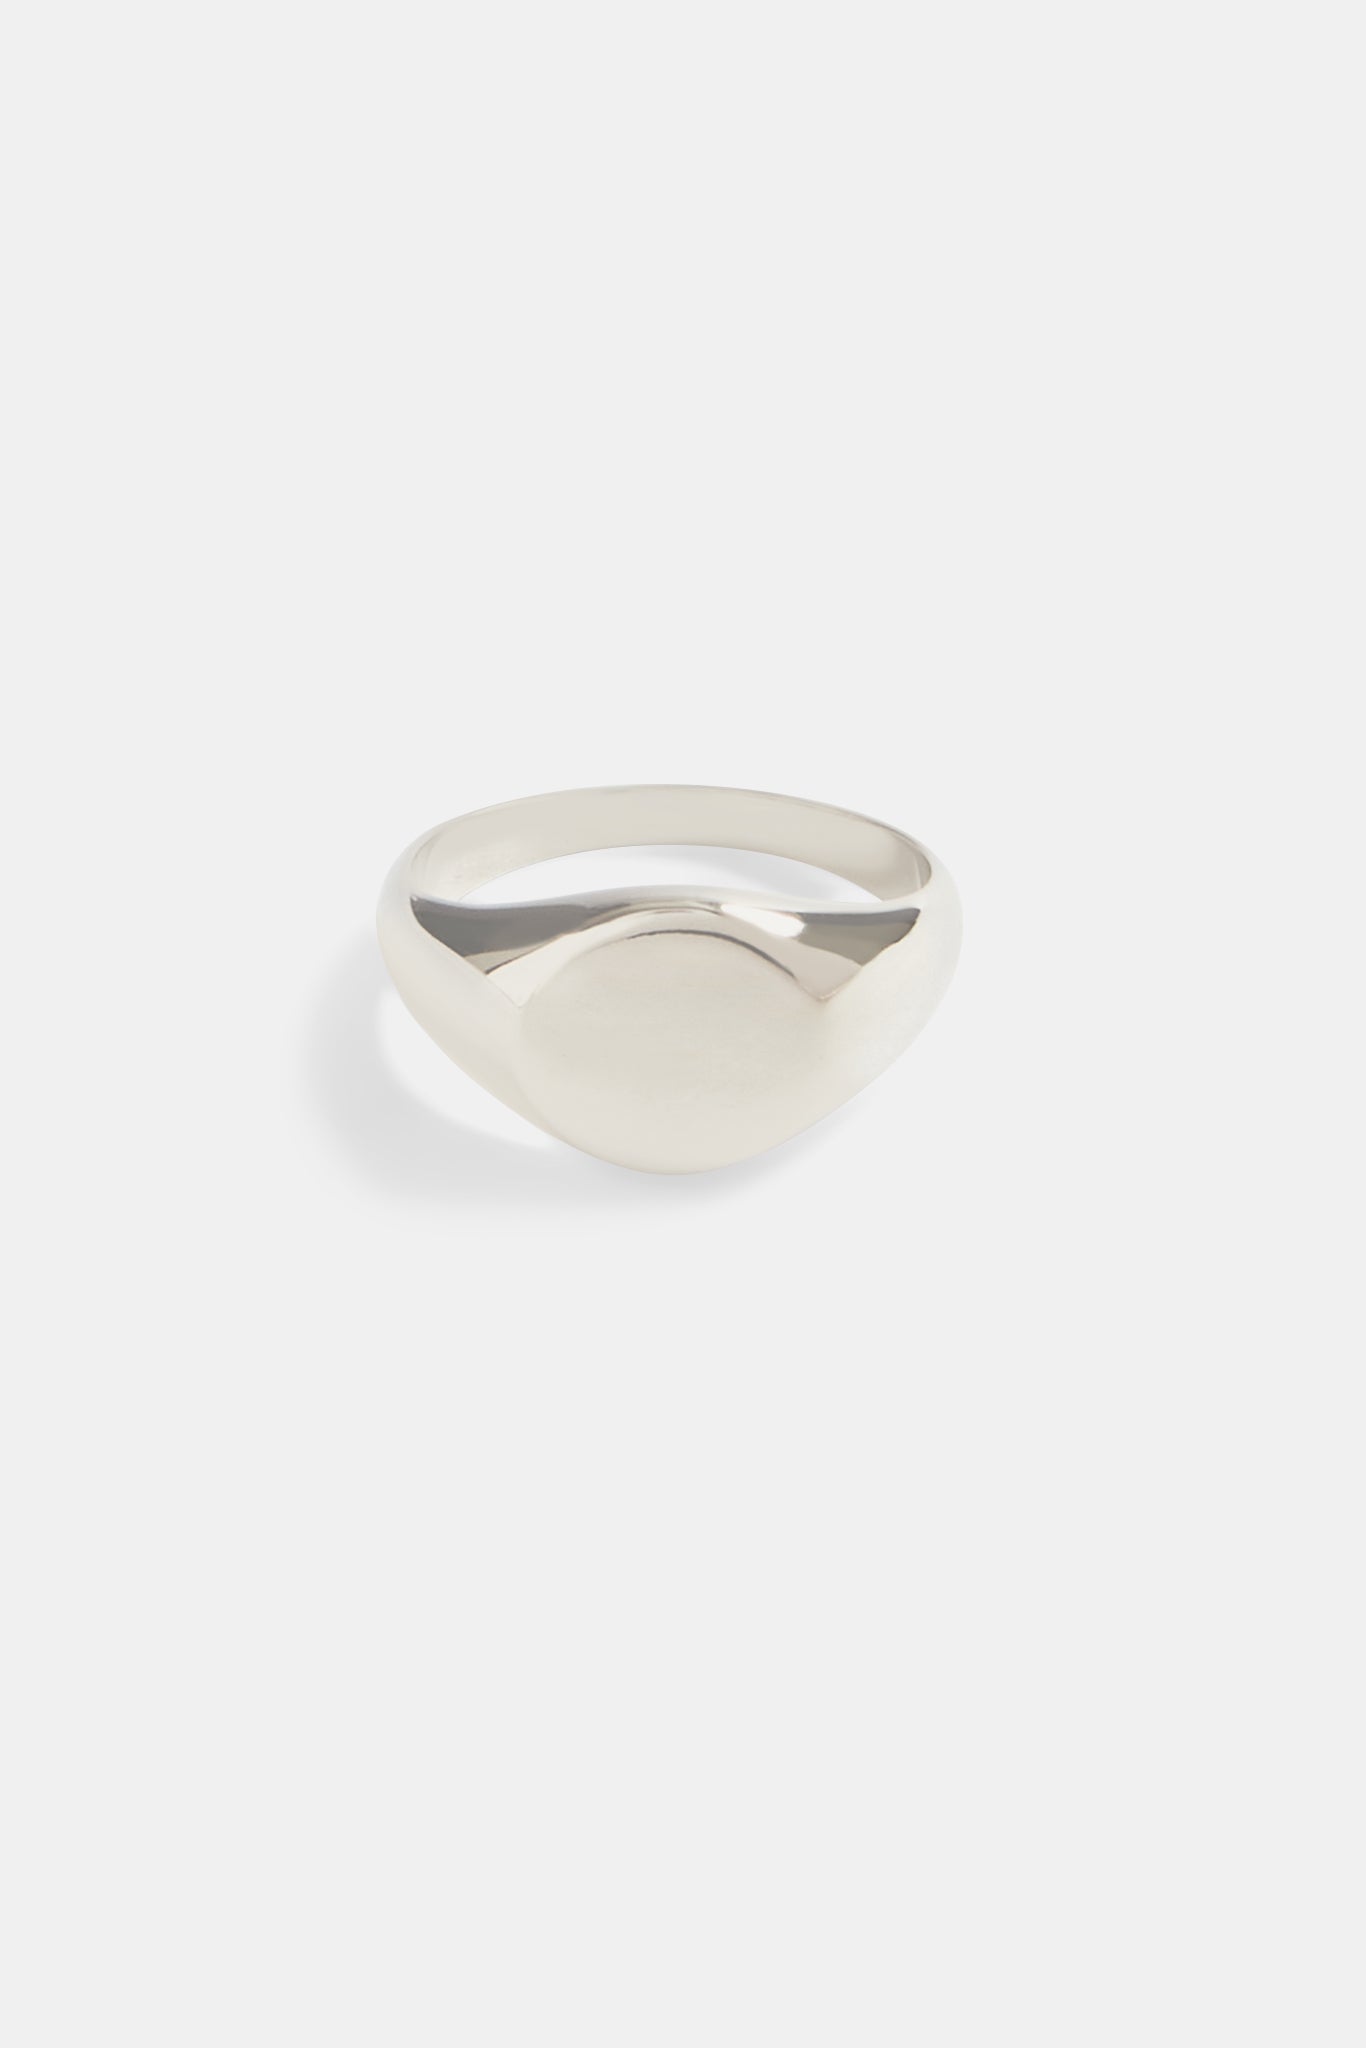 11mm Polished Round Signet Ring - White Gold | Mens Rings | Shop Signet ...